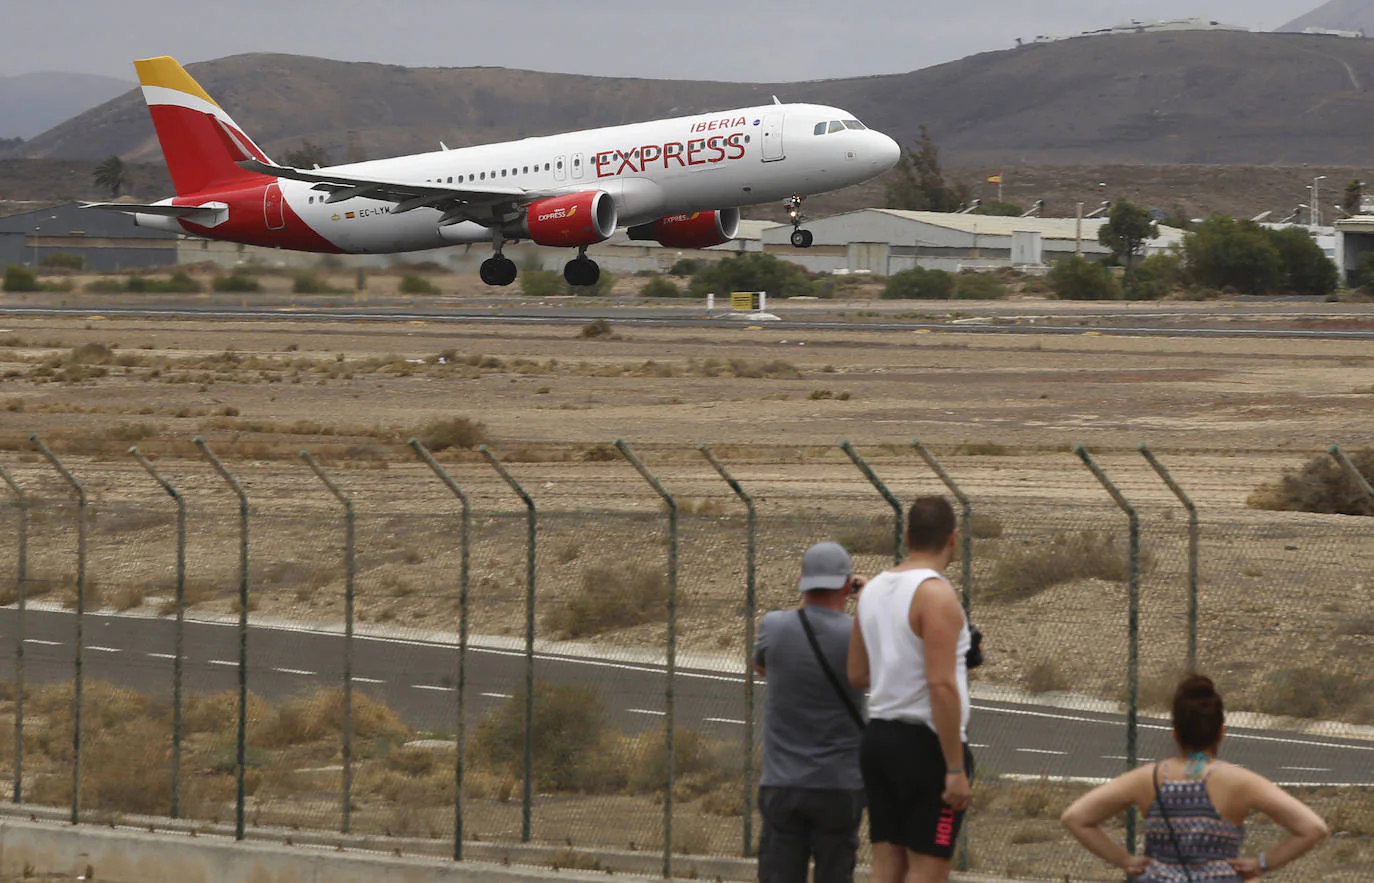 Image of an Iberia Express flight, taking off in Lanzarote. 